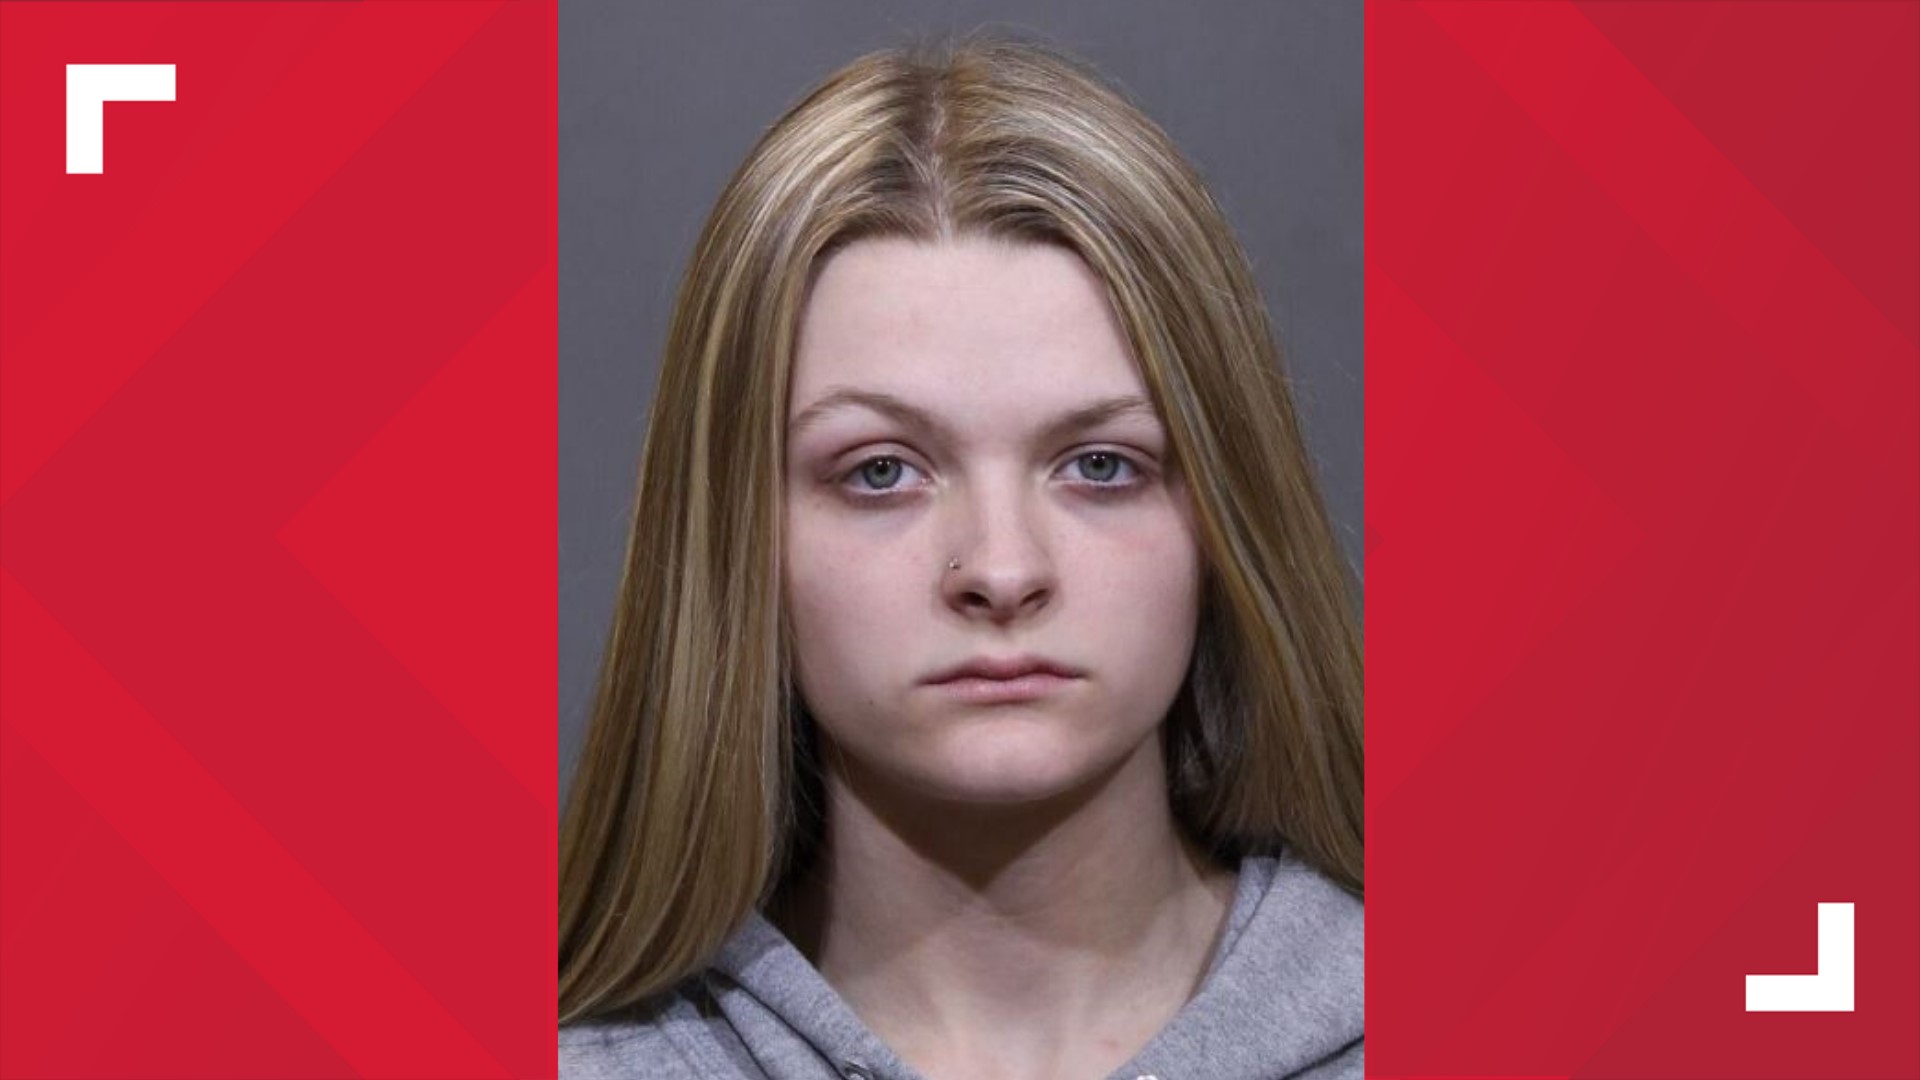 Bryanna Barozzini, 18, is charged with the murder of 17-year-old Halia Culbertson.